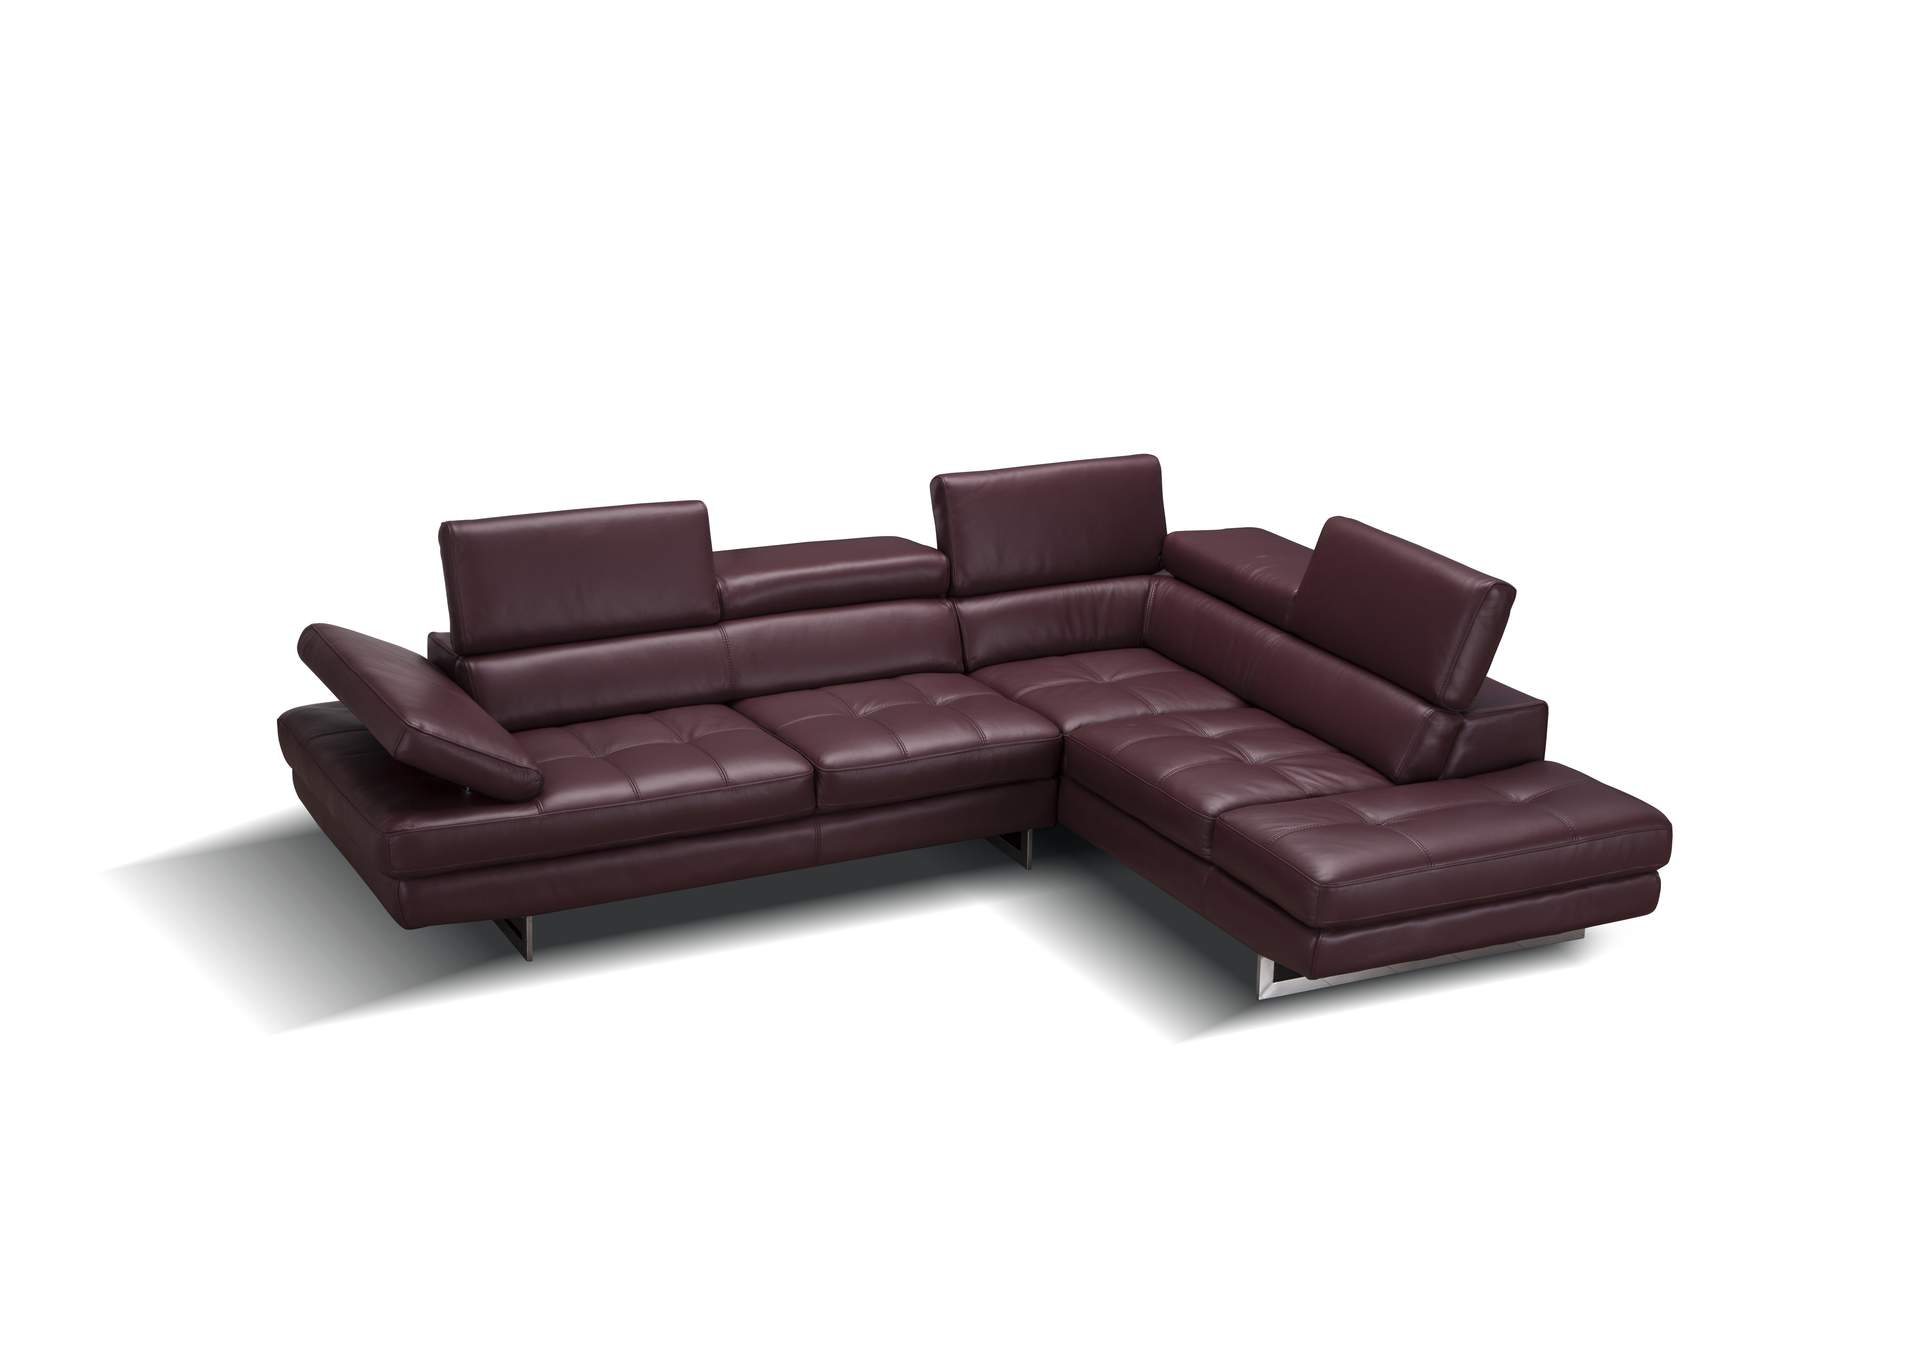 A761 Italian Leather Sectional Maroon In Right Hand Facing,J&M Furniture